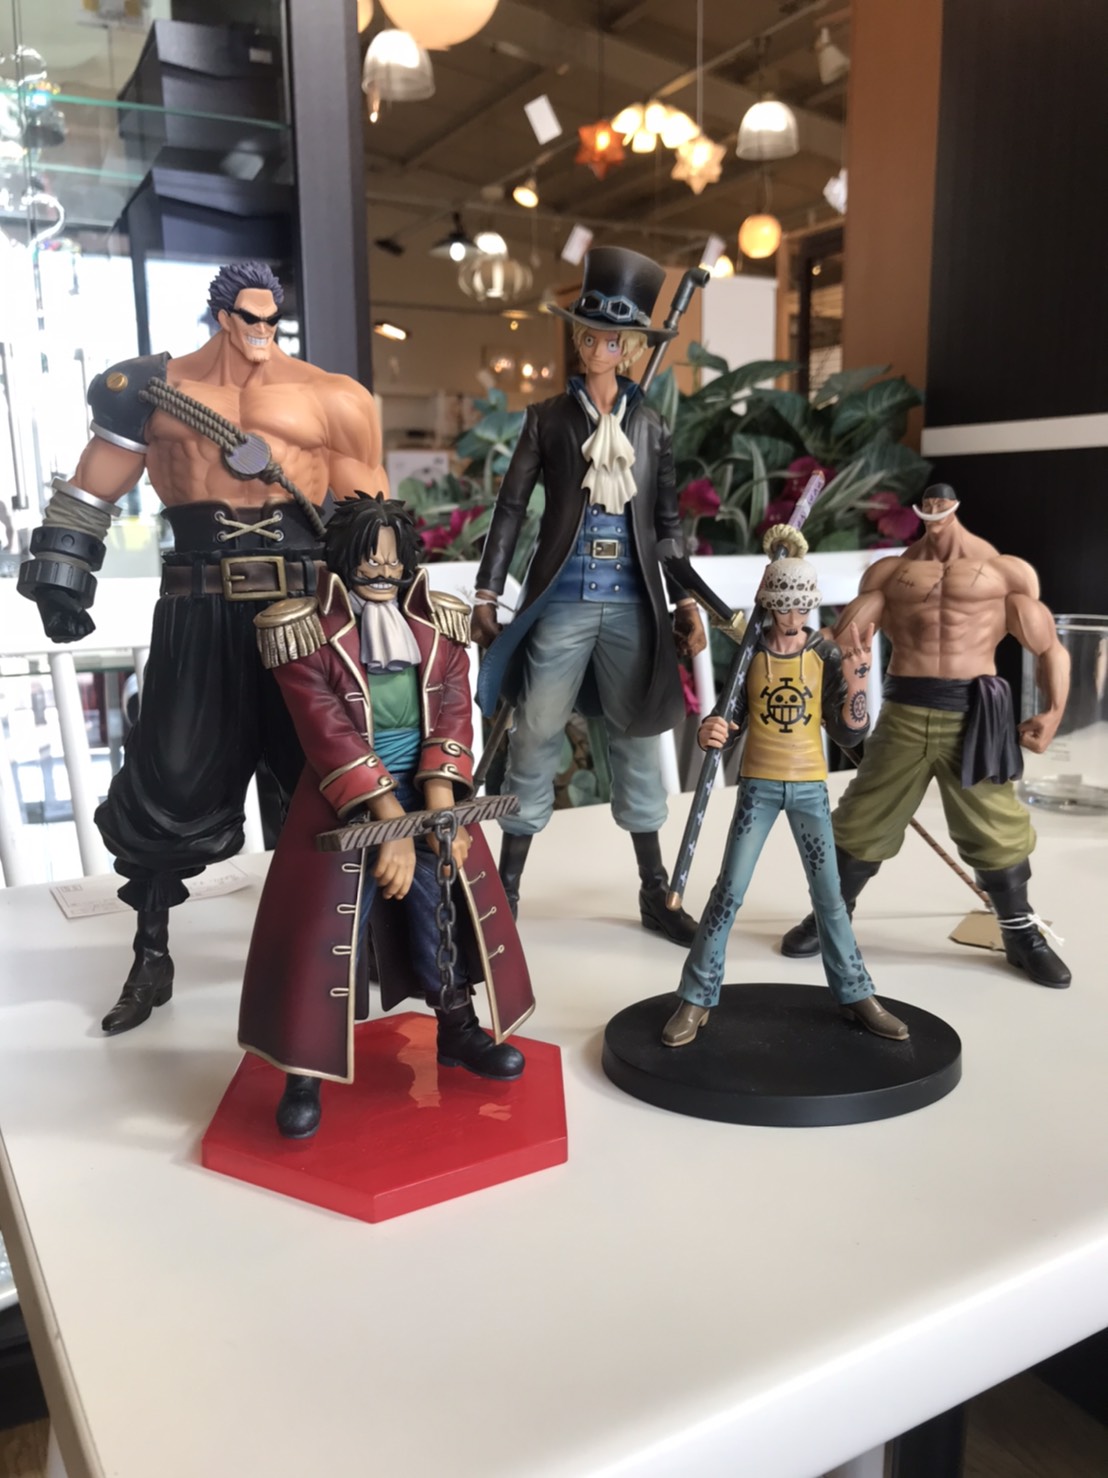 ONE PIECE フィギュア | paymentsway.co